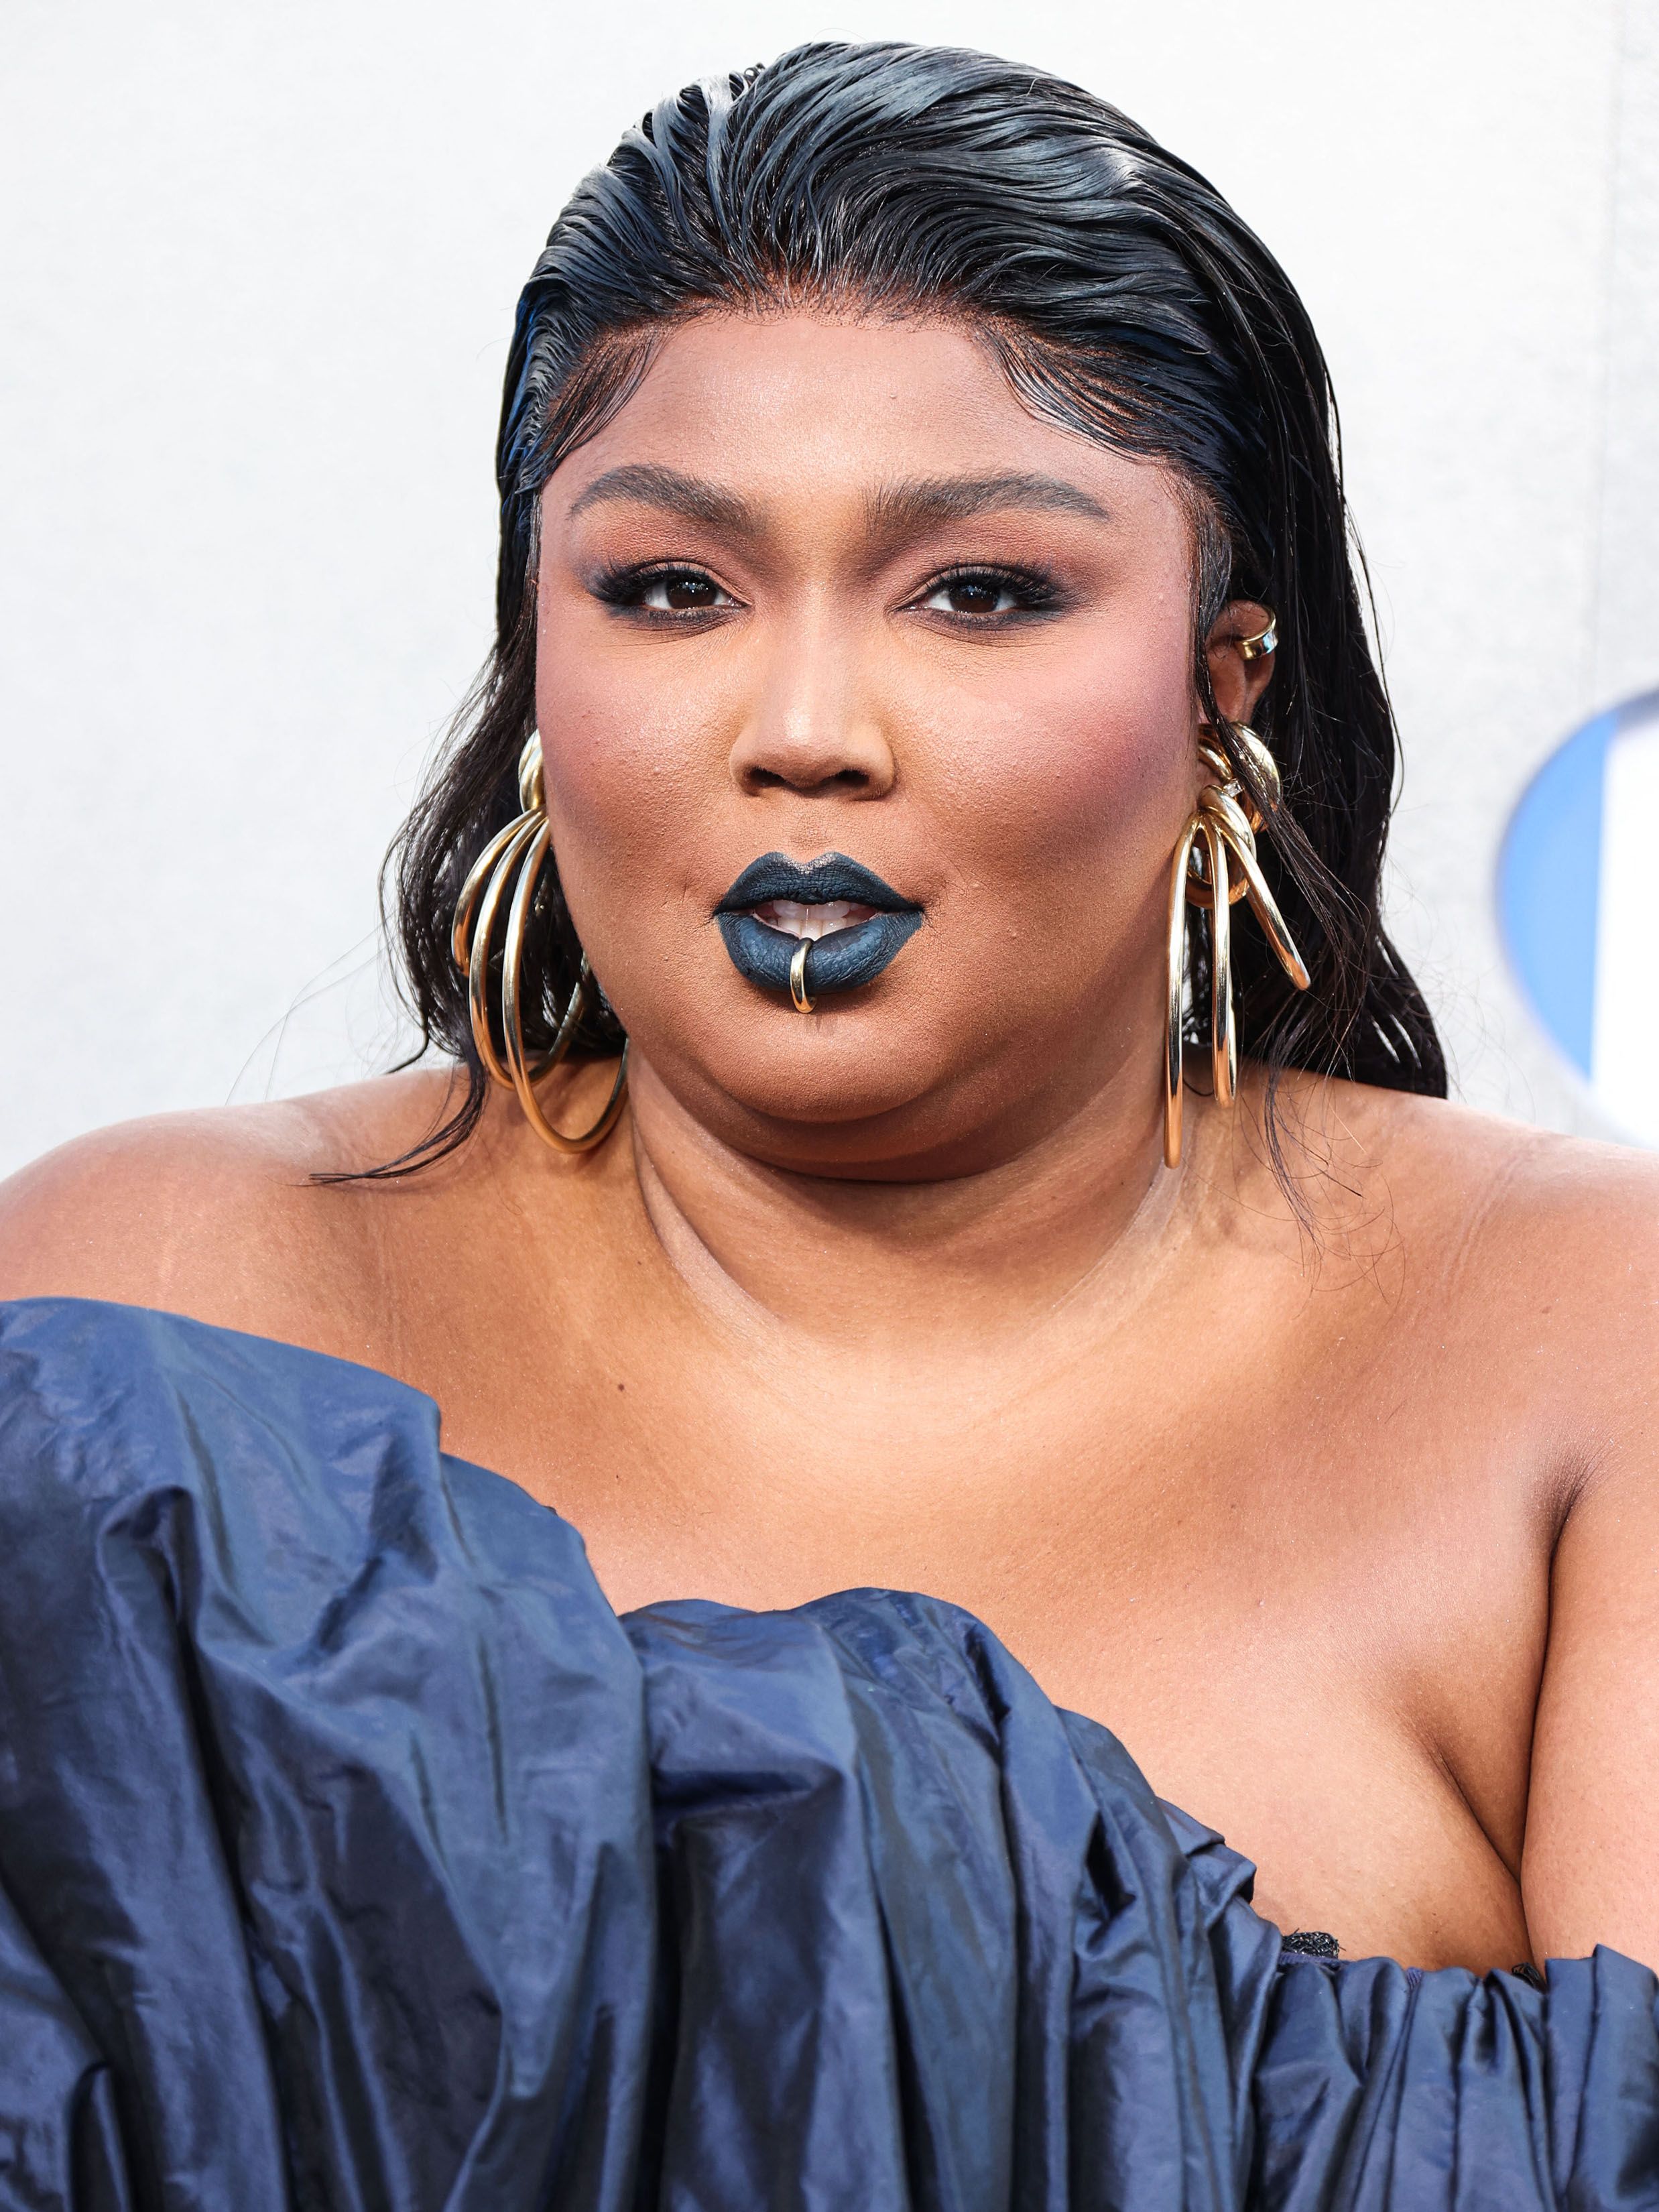 Lizzo at MTV Video Music Awards held at the Prudential Center